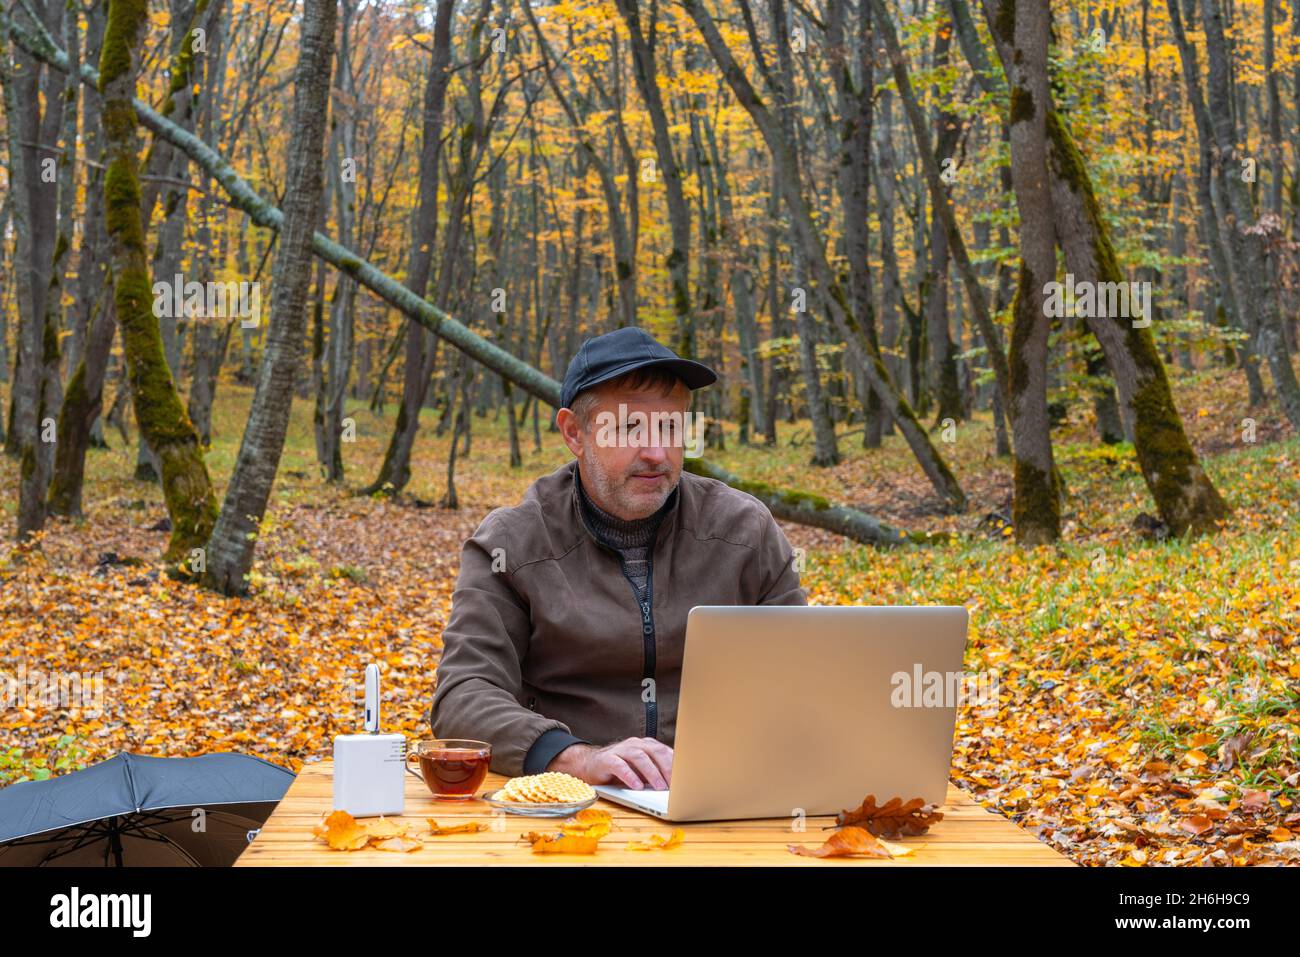 Man works at laptop in autumn forest Stock Photo